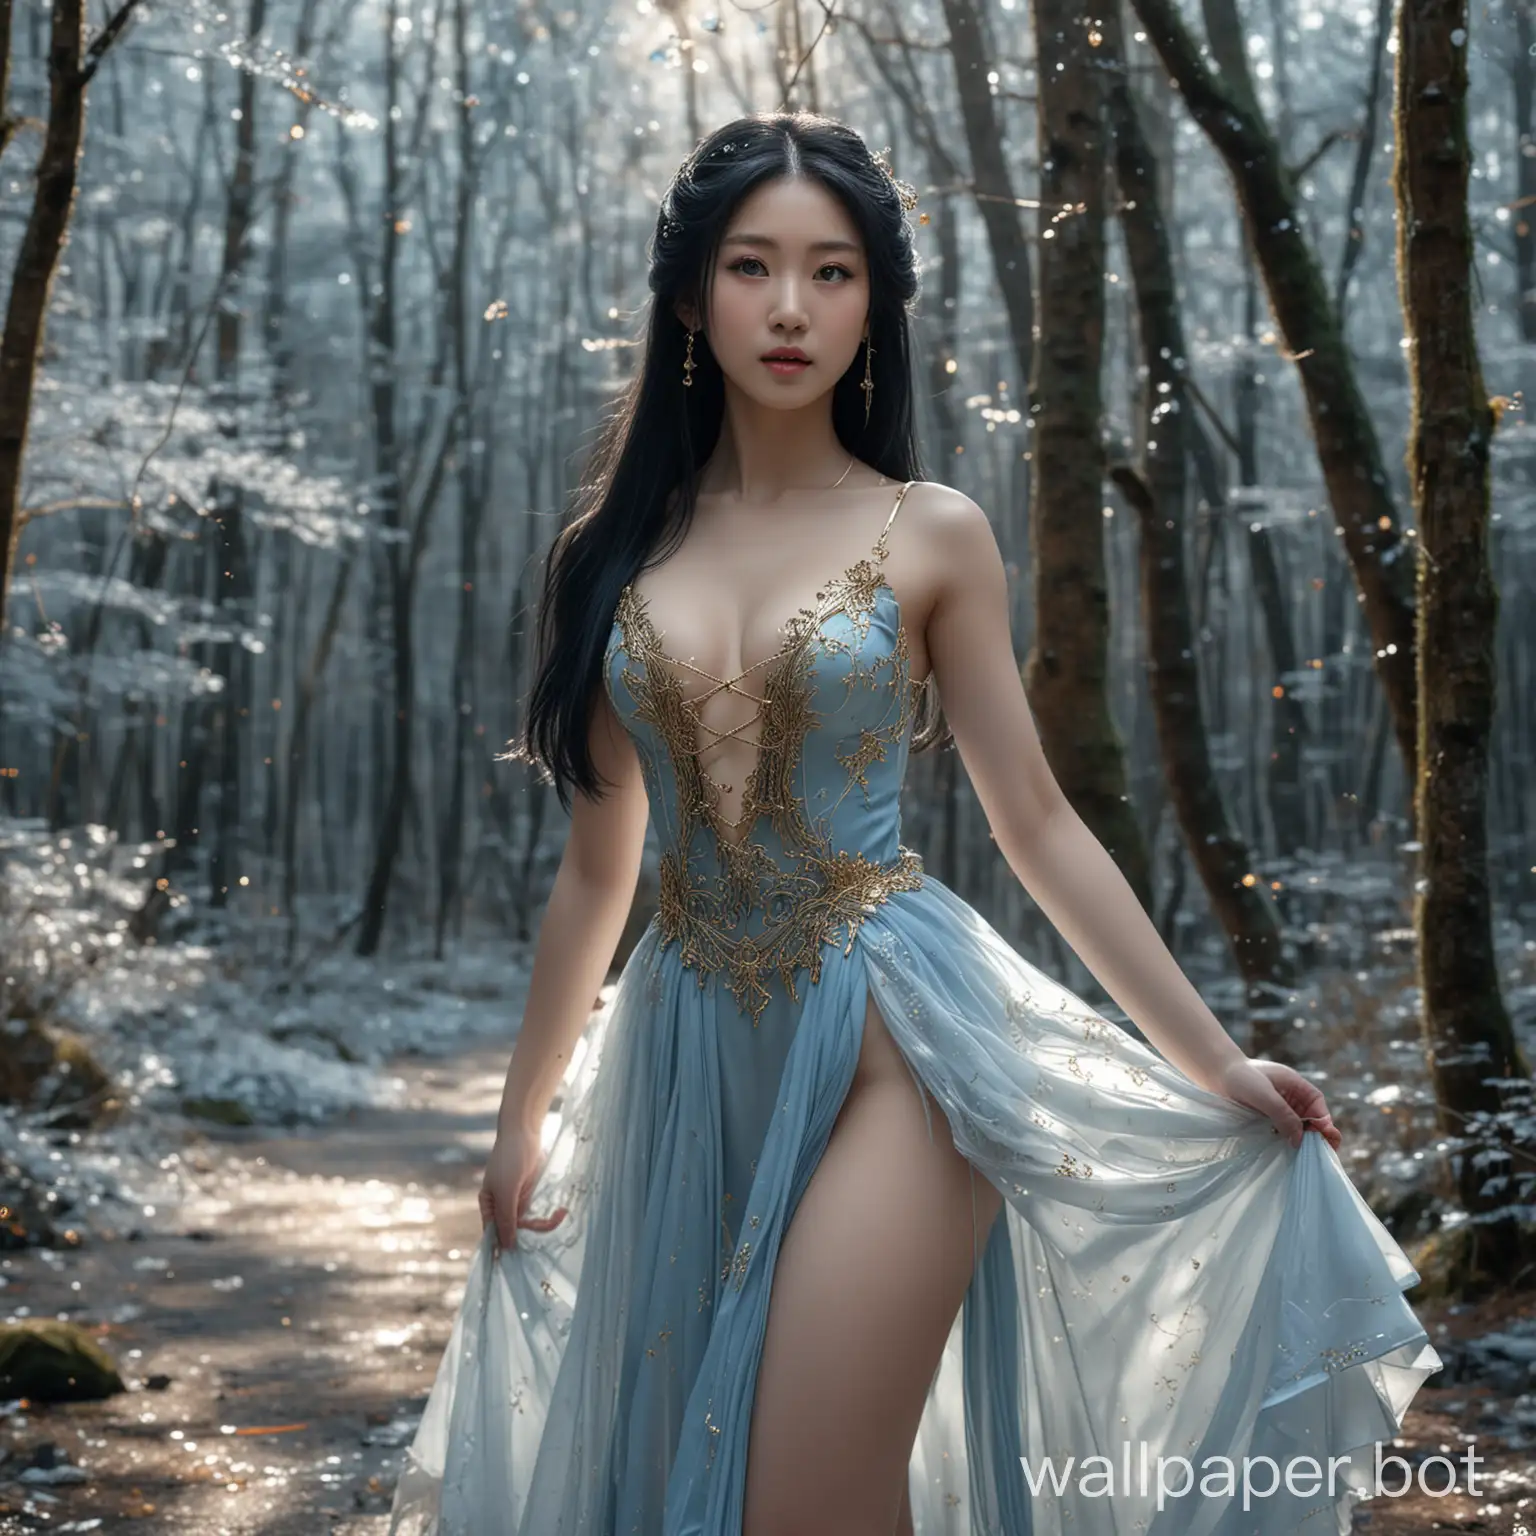 young japanese girl. long blue black hair with gold ornaments. wear cleavage dress with long slith skirt. porcelain skins. strap heels. no wear bra. no wear panties. big breast. ballet pose. icy forrest in backgrund, light from firefly. hdr. 8k detail